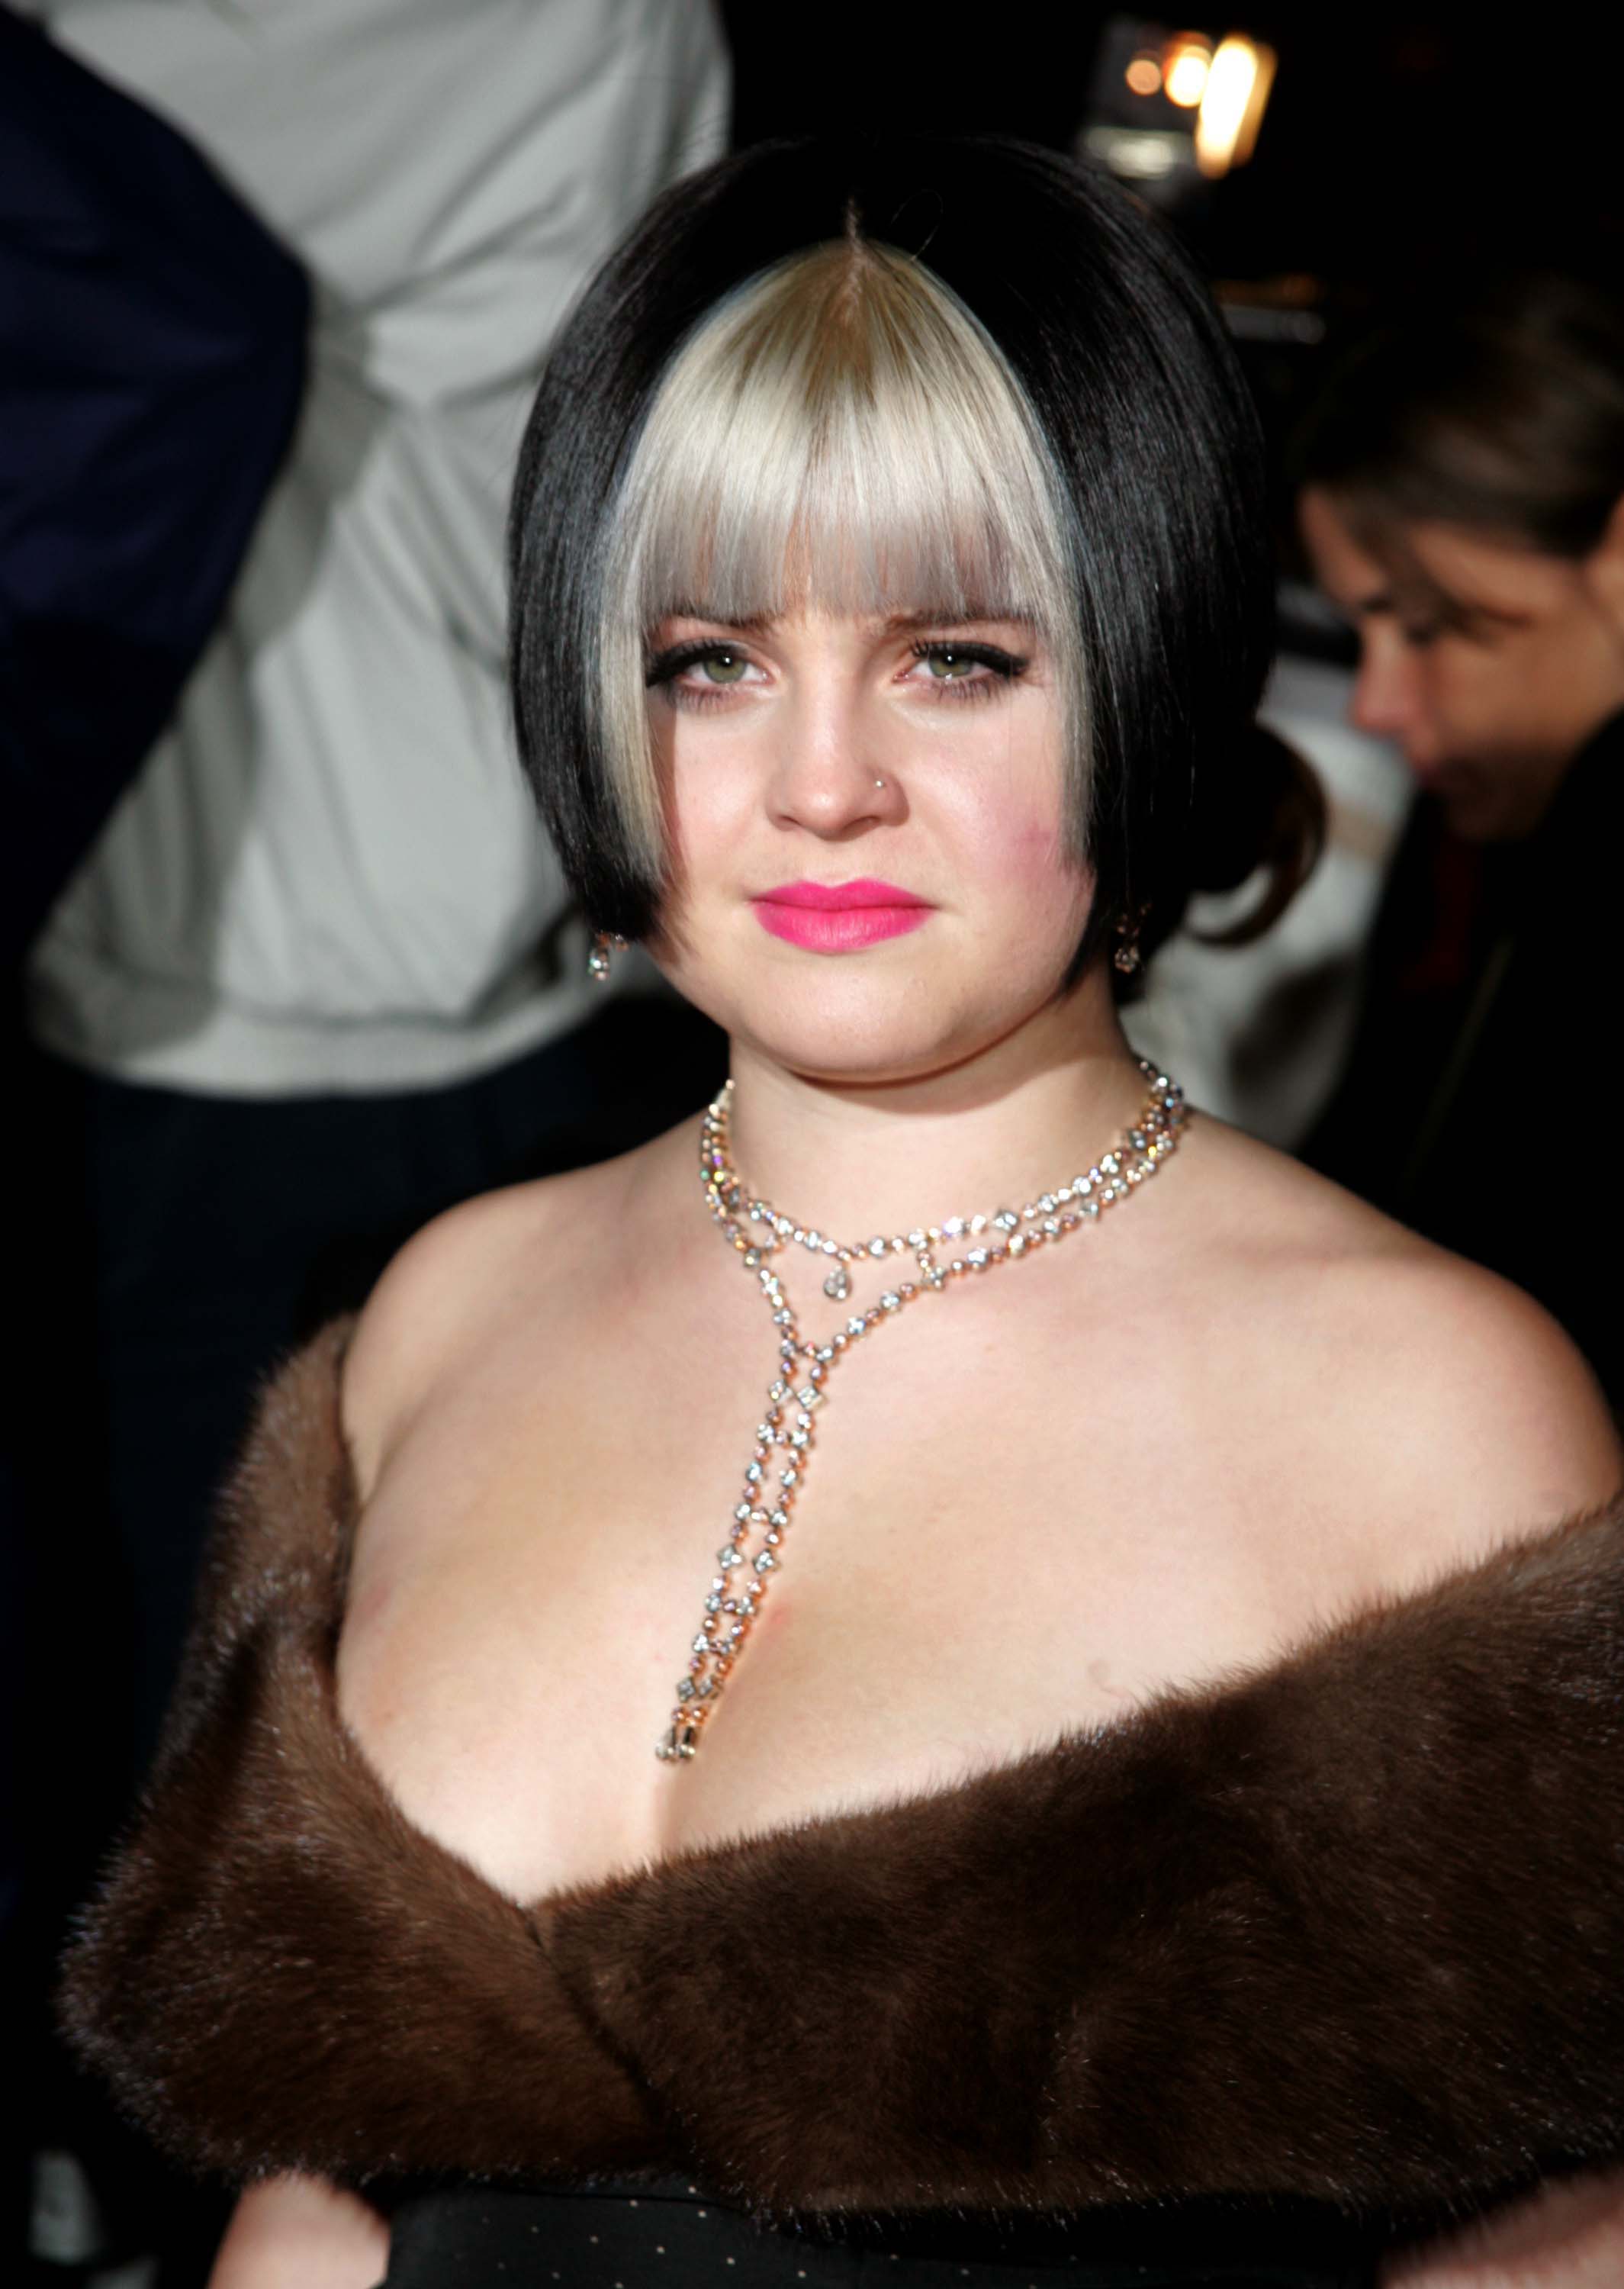 Kelly Osbourne during the New York premiere of "Shall We Dance" at Paris Theater on October 05, 2004 in New York City ┃Source: Getty Images